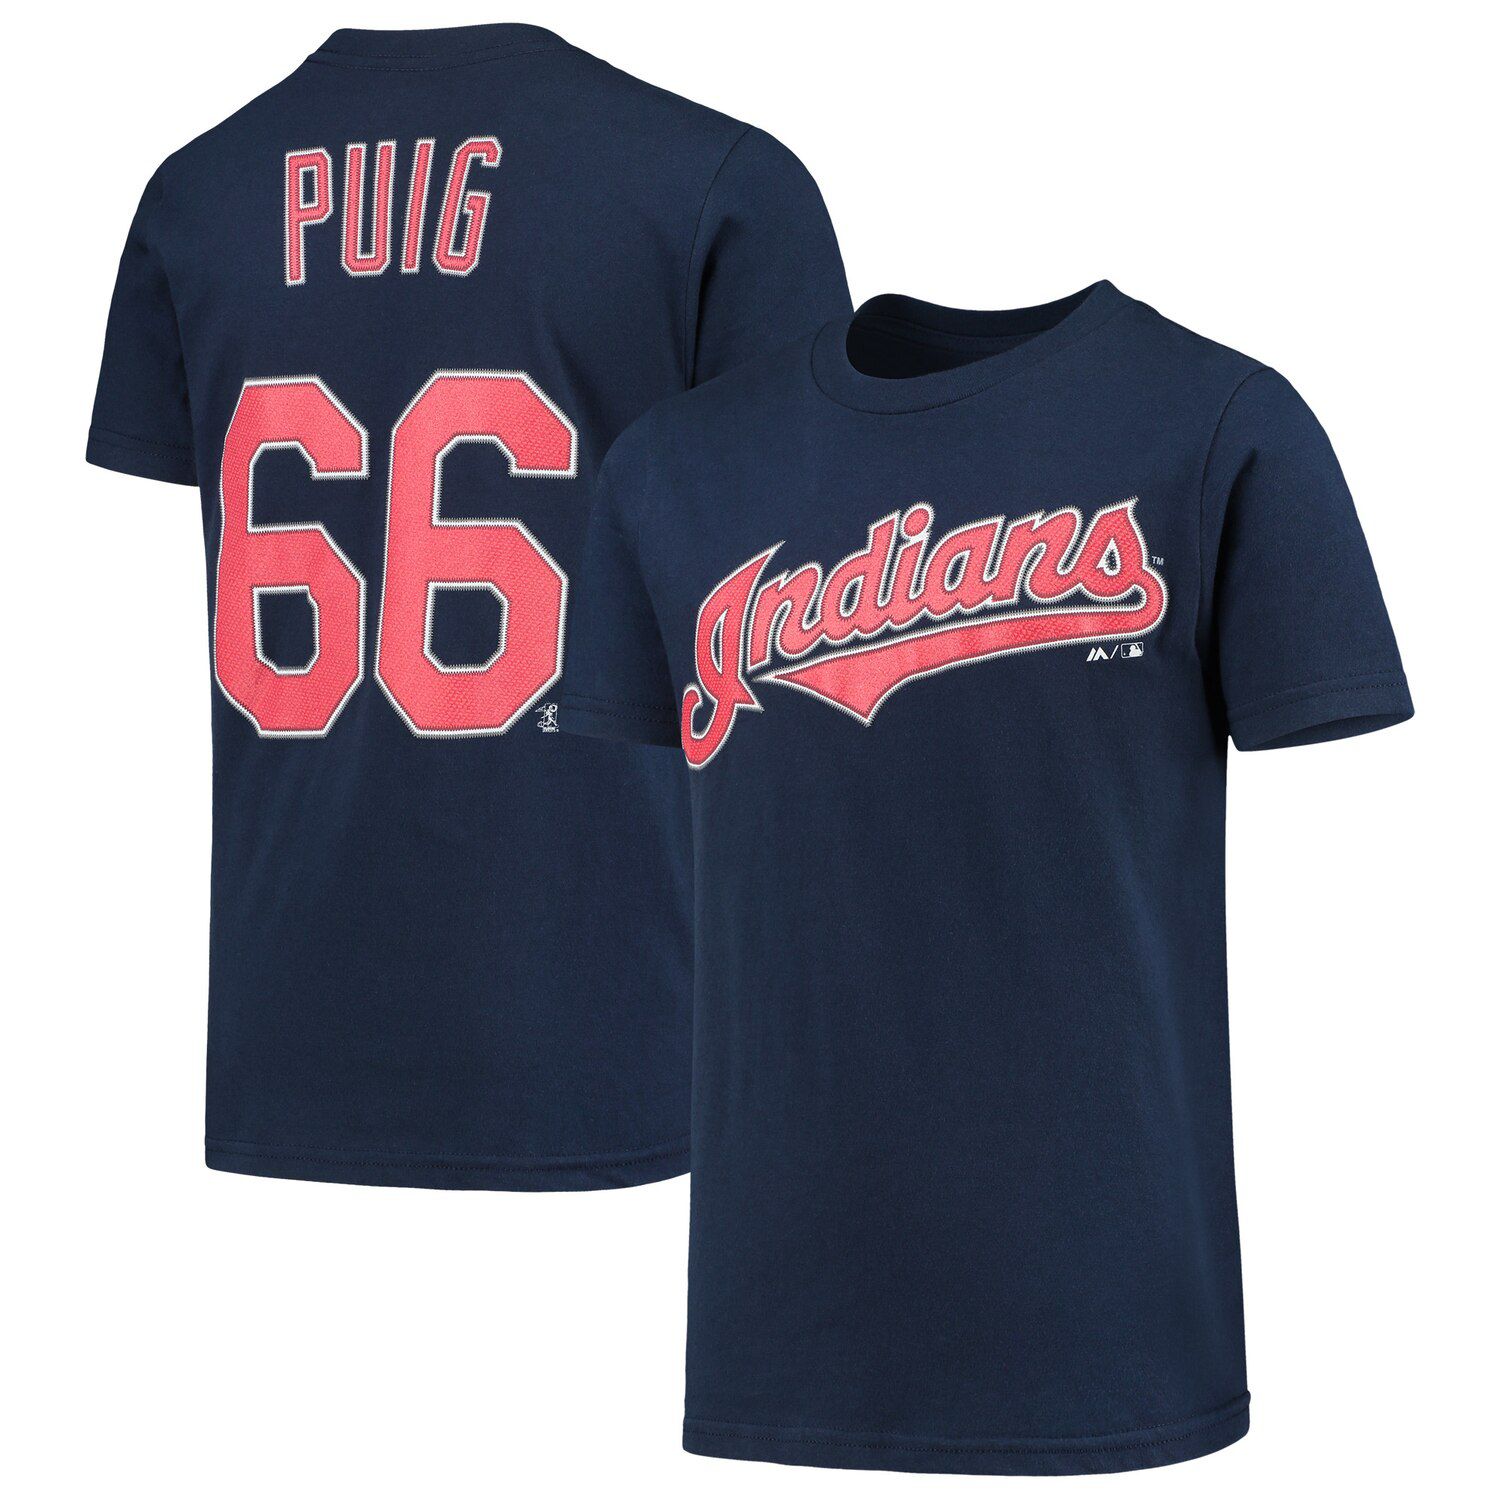 puig youth jersey